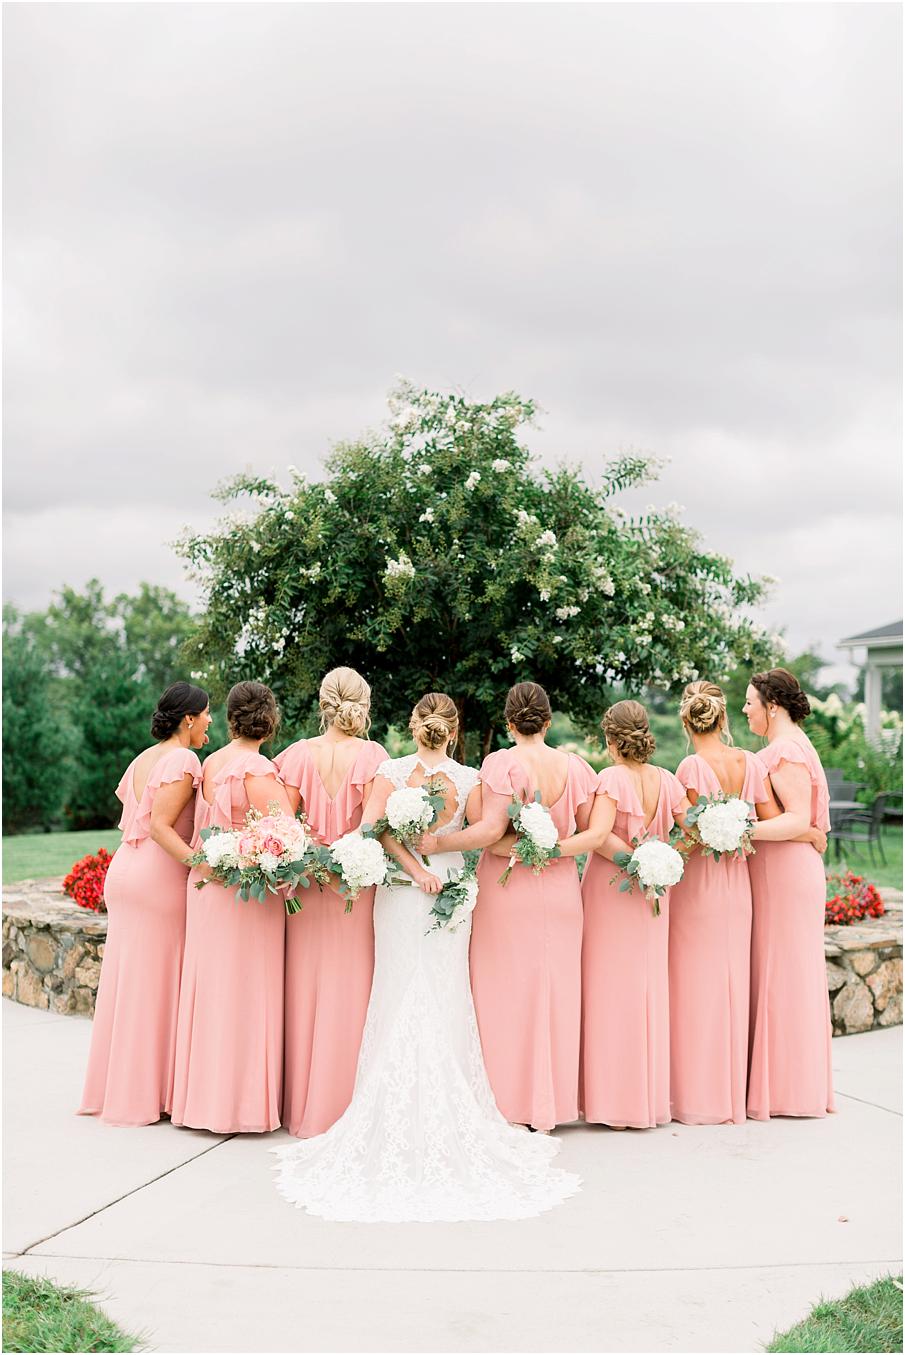 Blush bridesmaid dresses with white florals at Shadow Creek